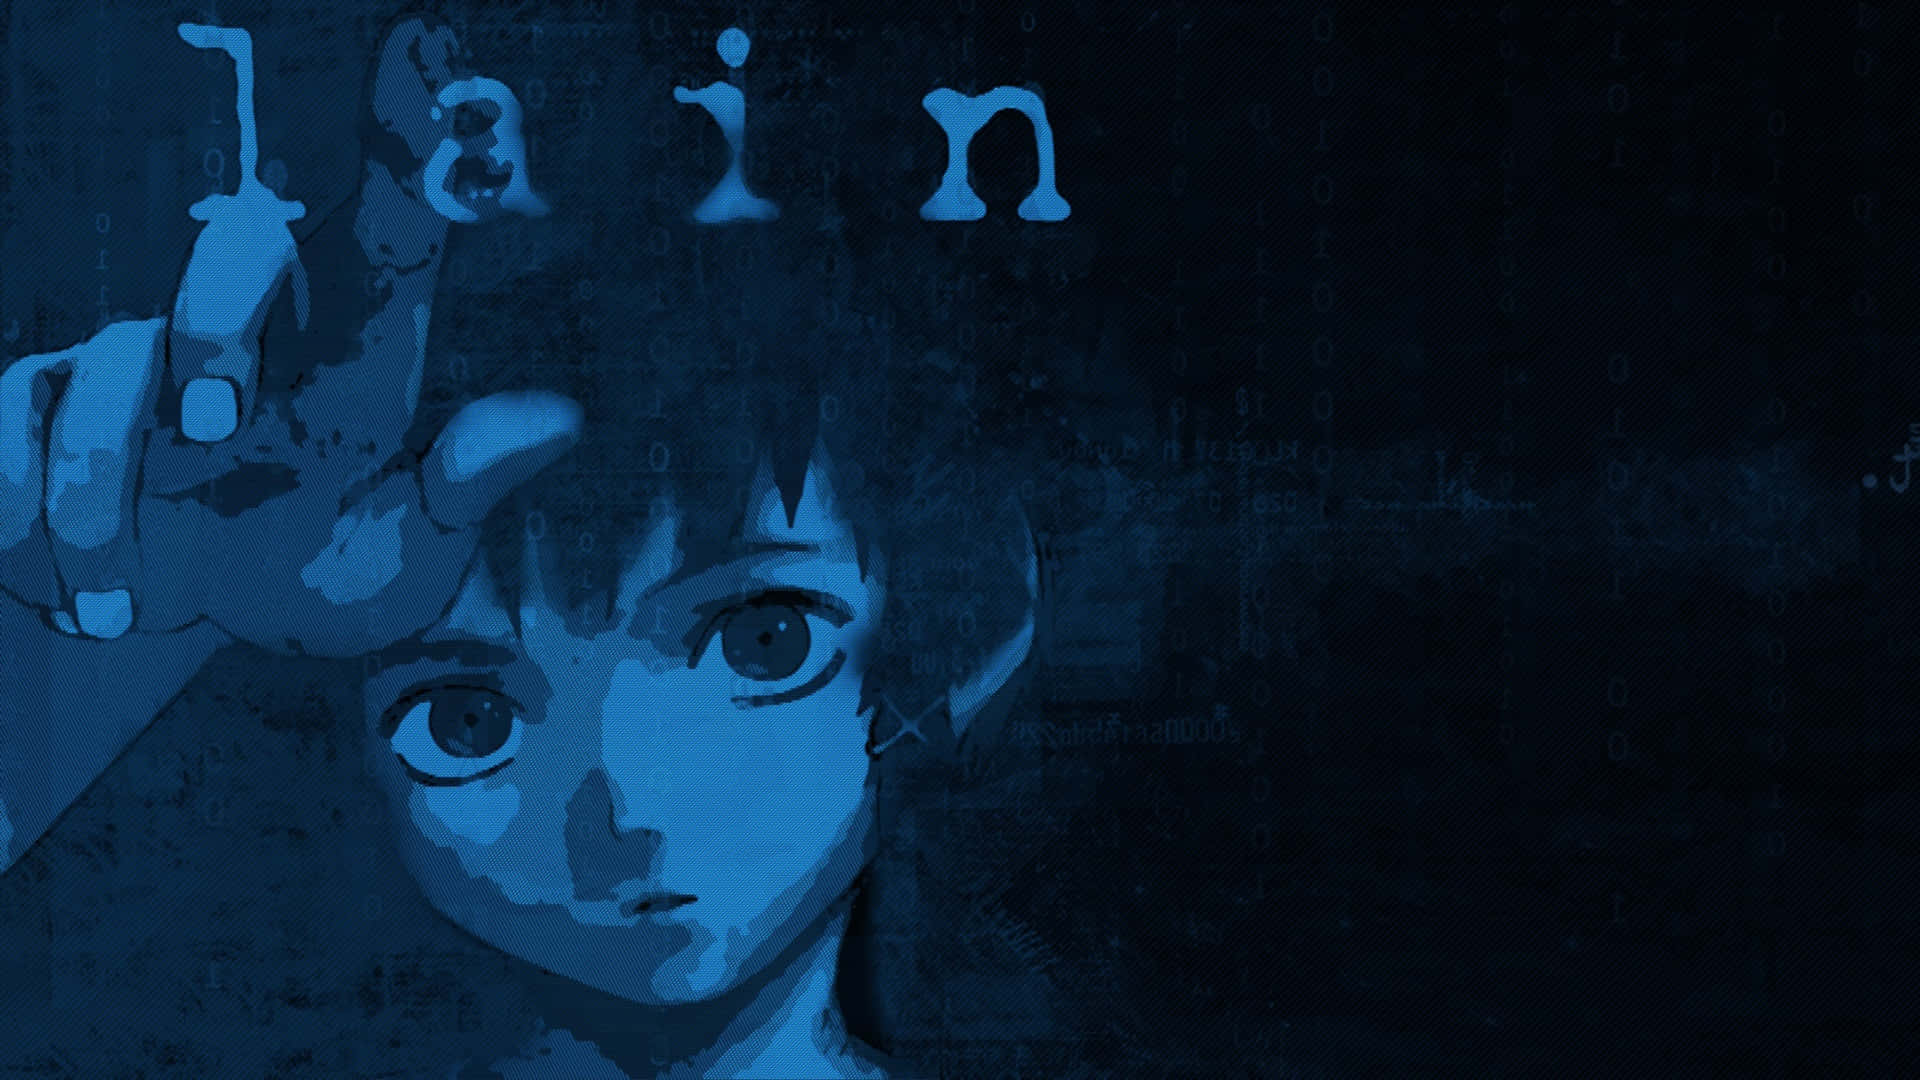 Serial Experiments Lain: The Breaking Point